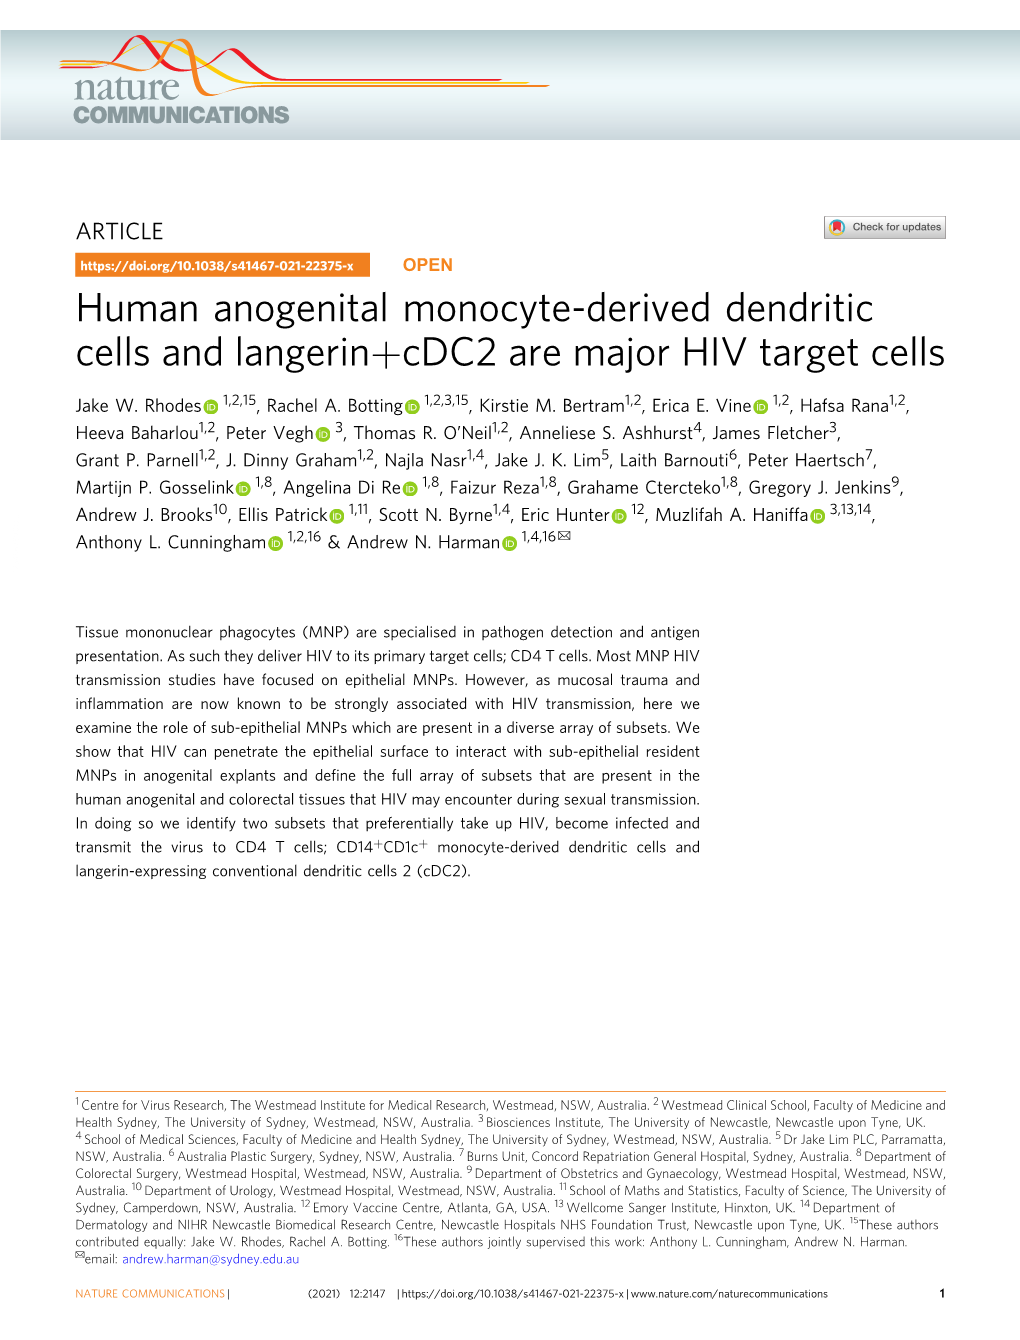 Human Anogenital Monocyte-Derived Dendritic Cells and Langerin+Cdc2 Are Major HIV Target Cells